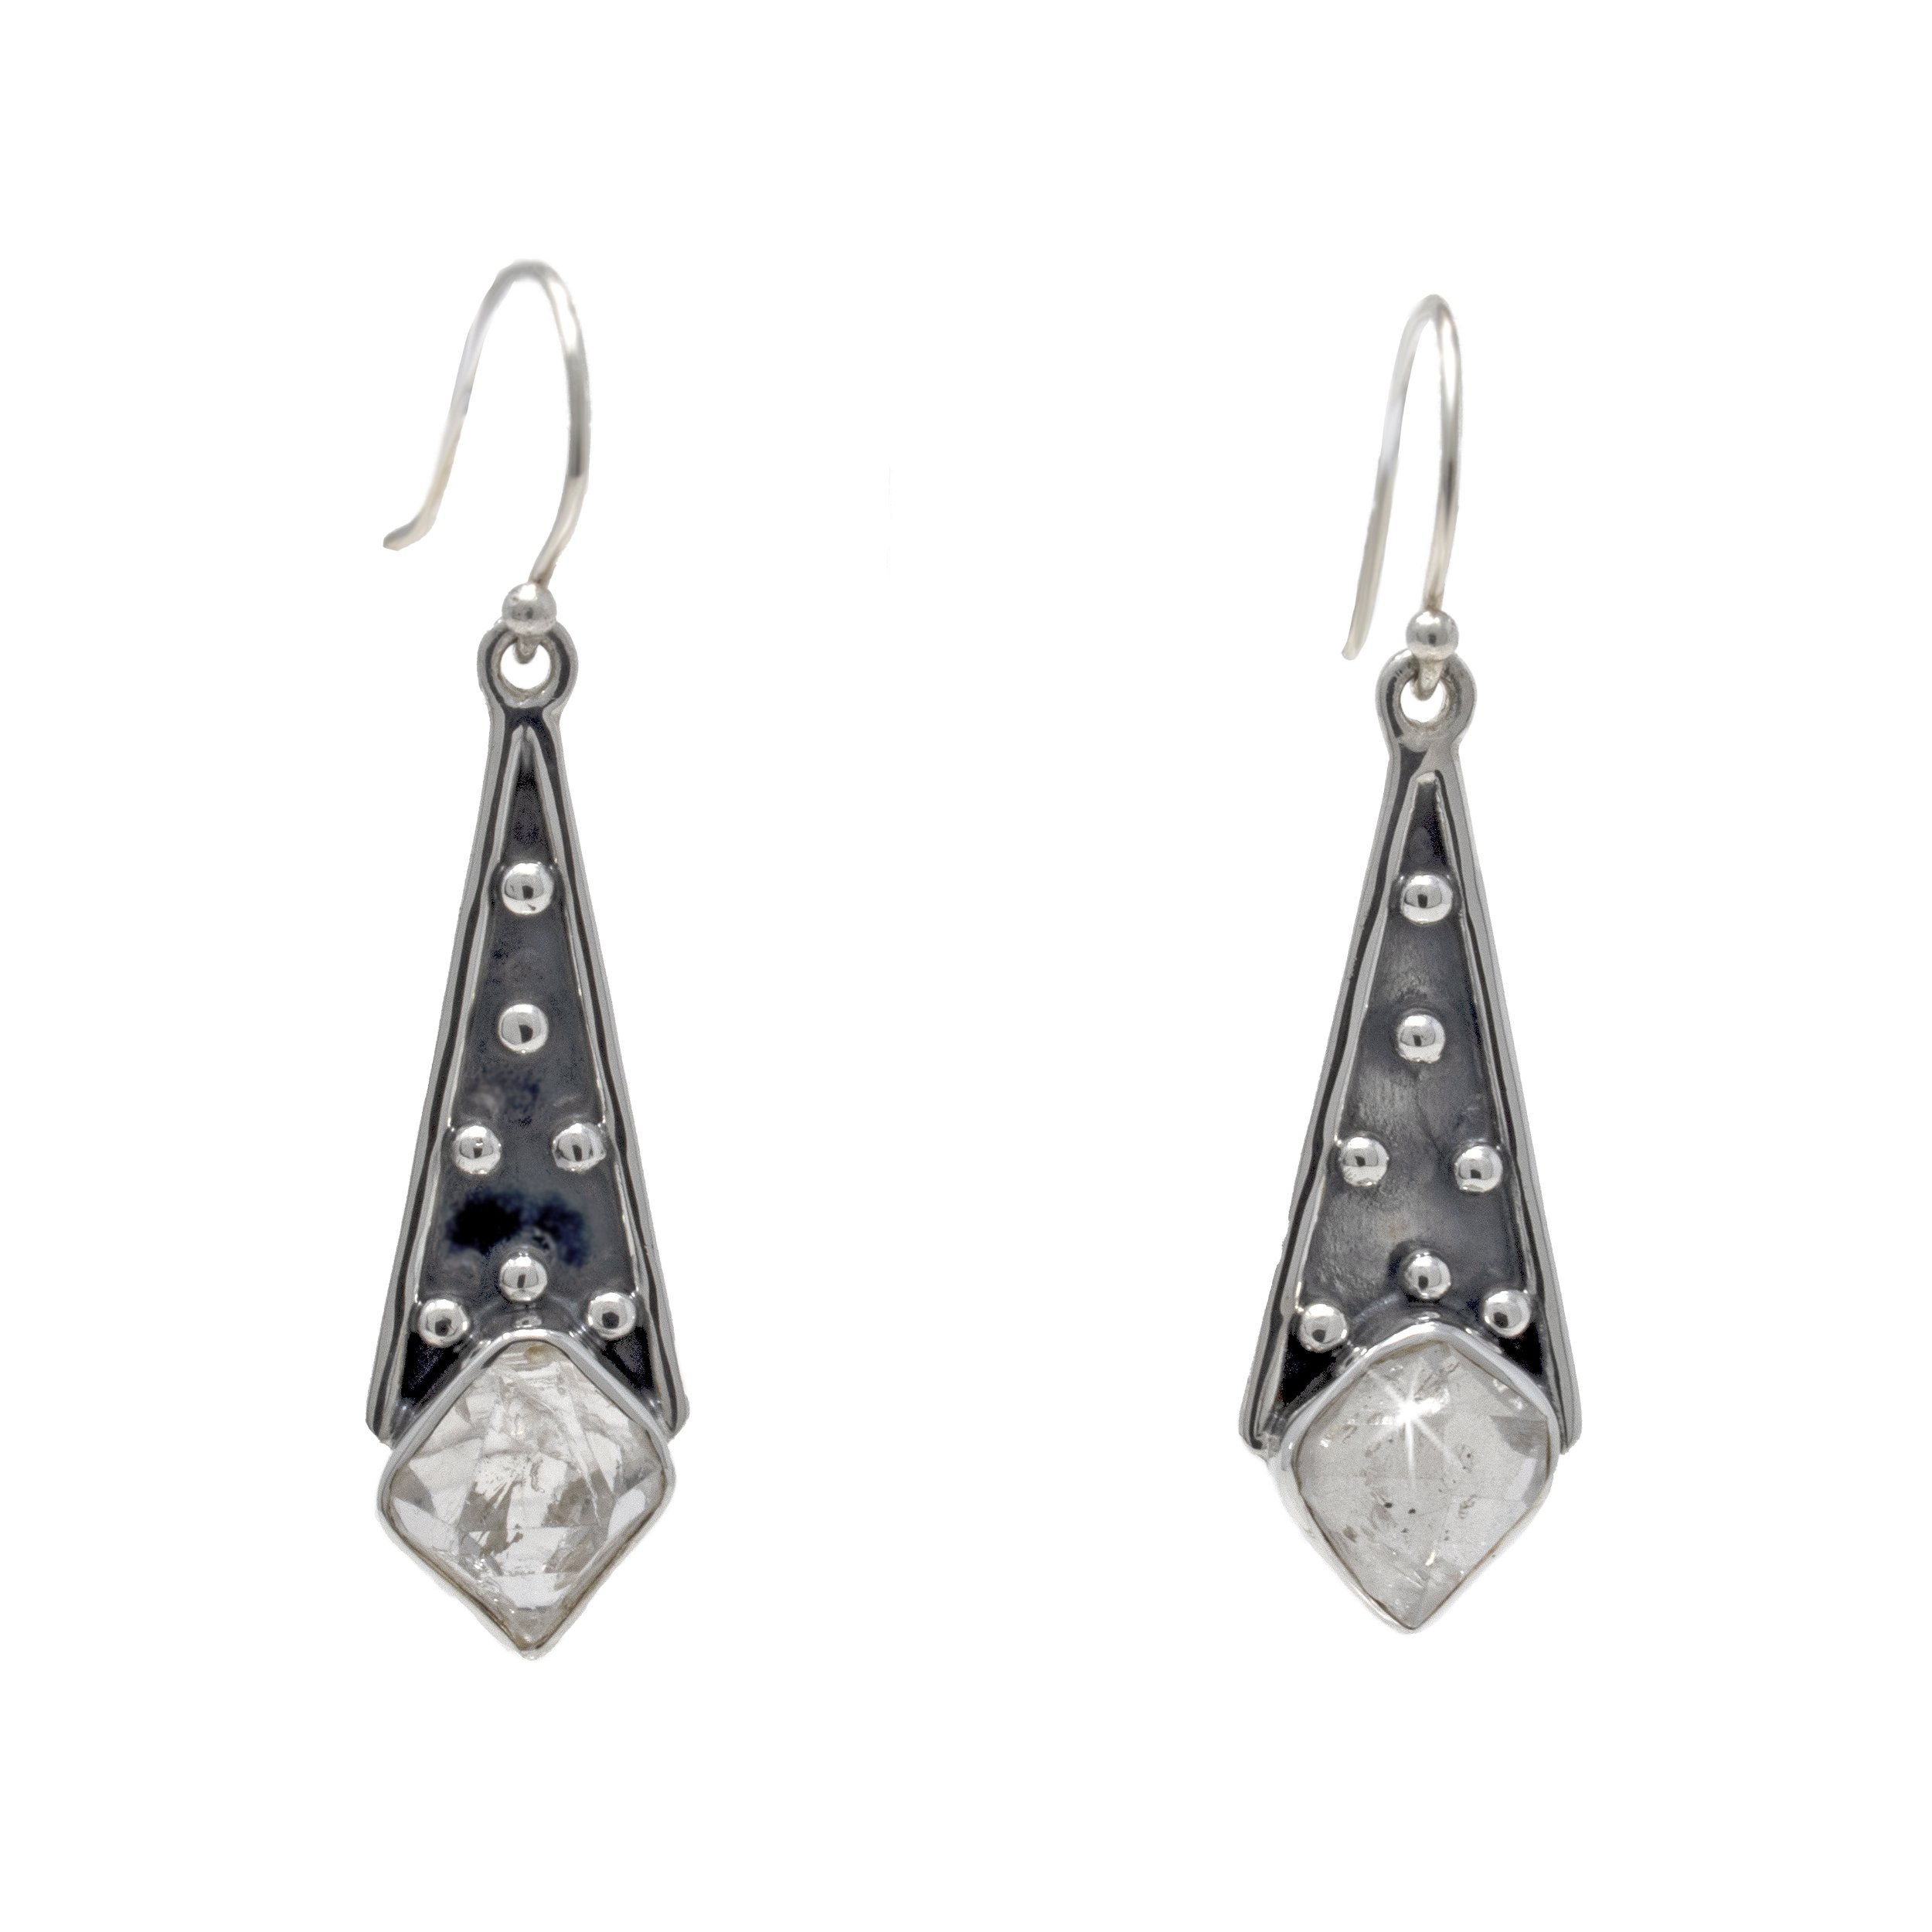 Herkimer Diamond Dangle Earrings - Natural Point Set On Elongated Silver Triangle With Beaded Detail